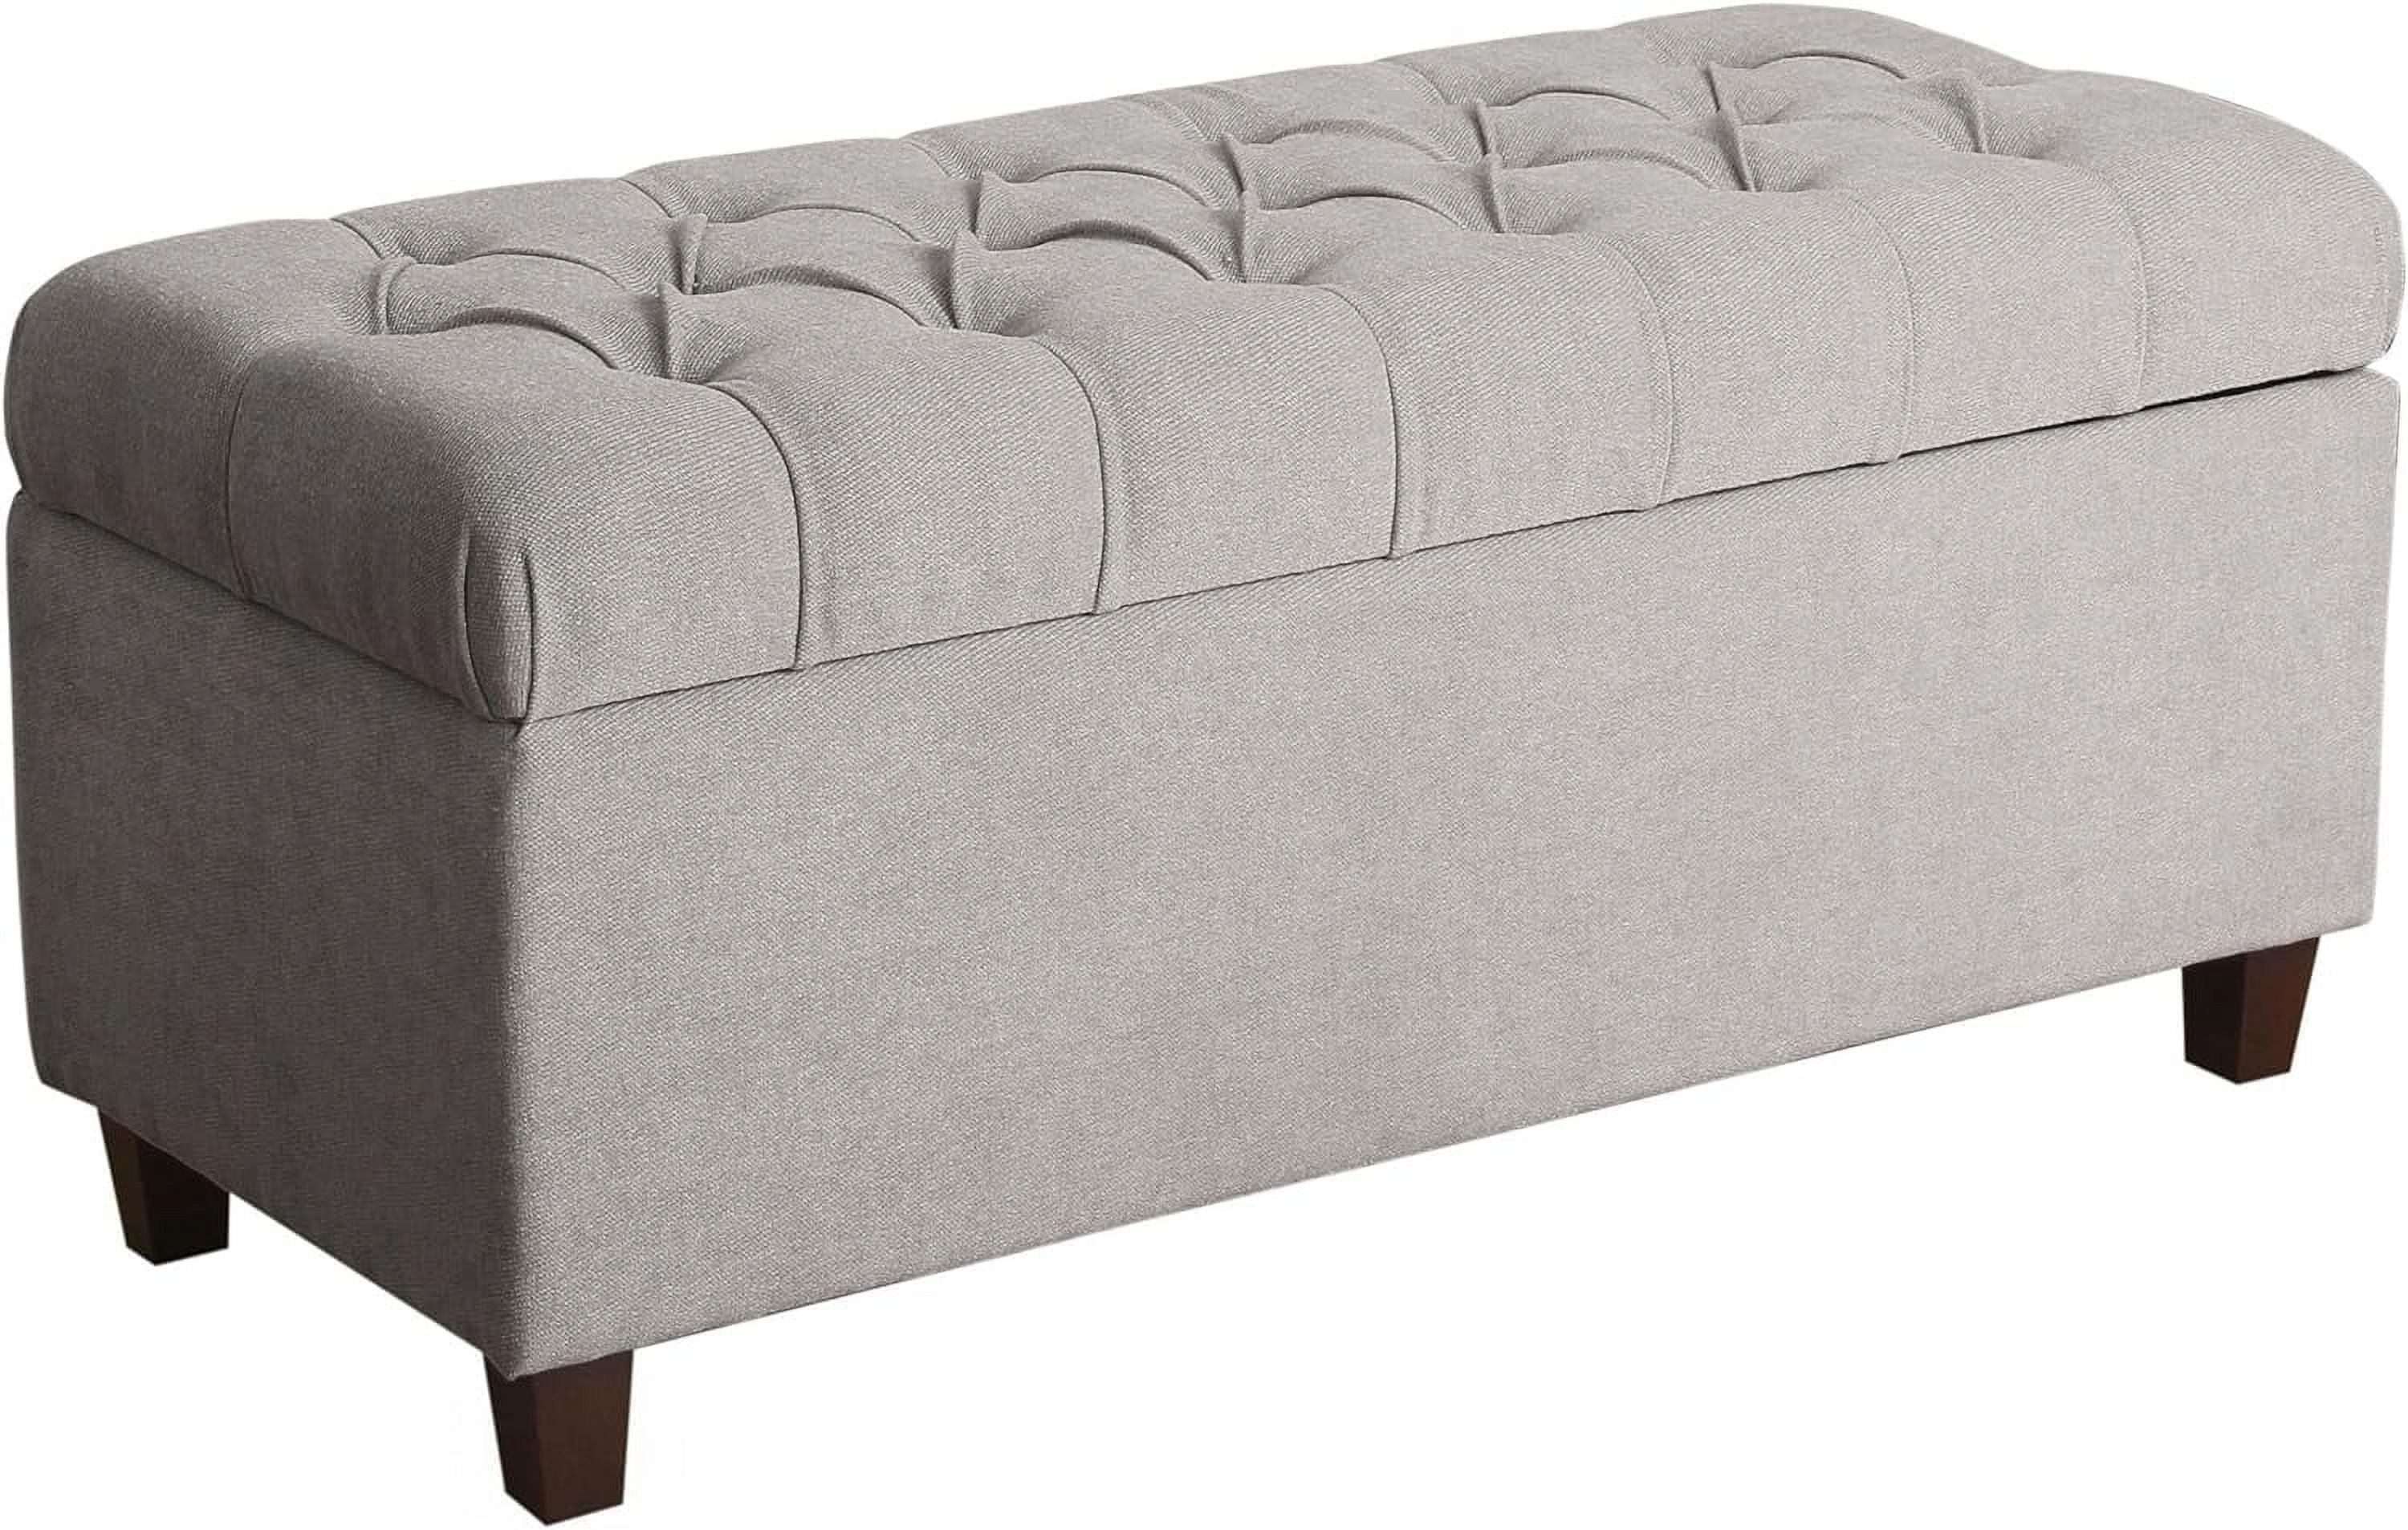 Contemporary Light Gray Tufted Bench with Walnut Brown Storage